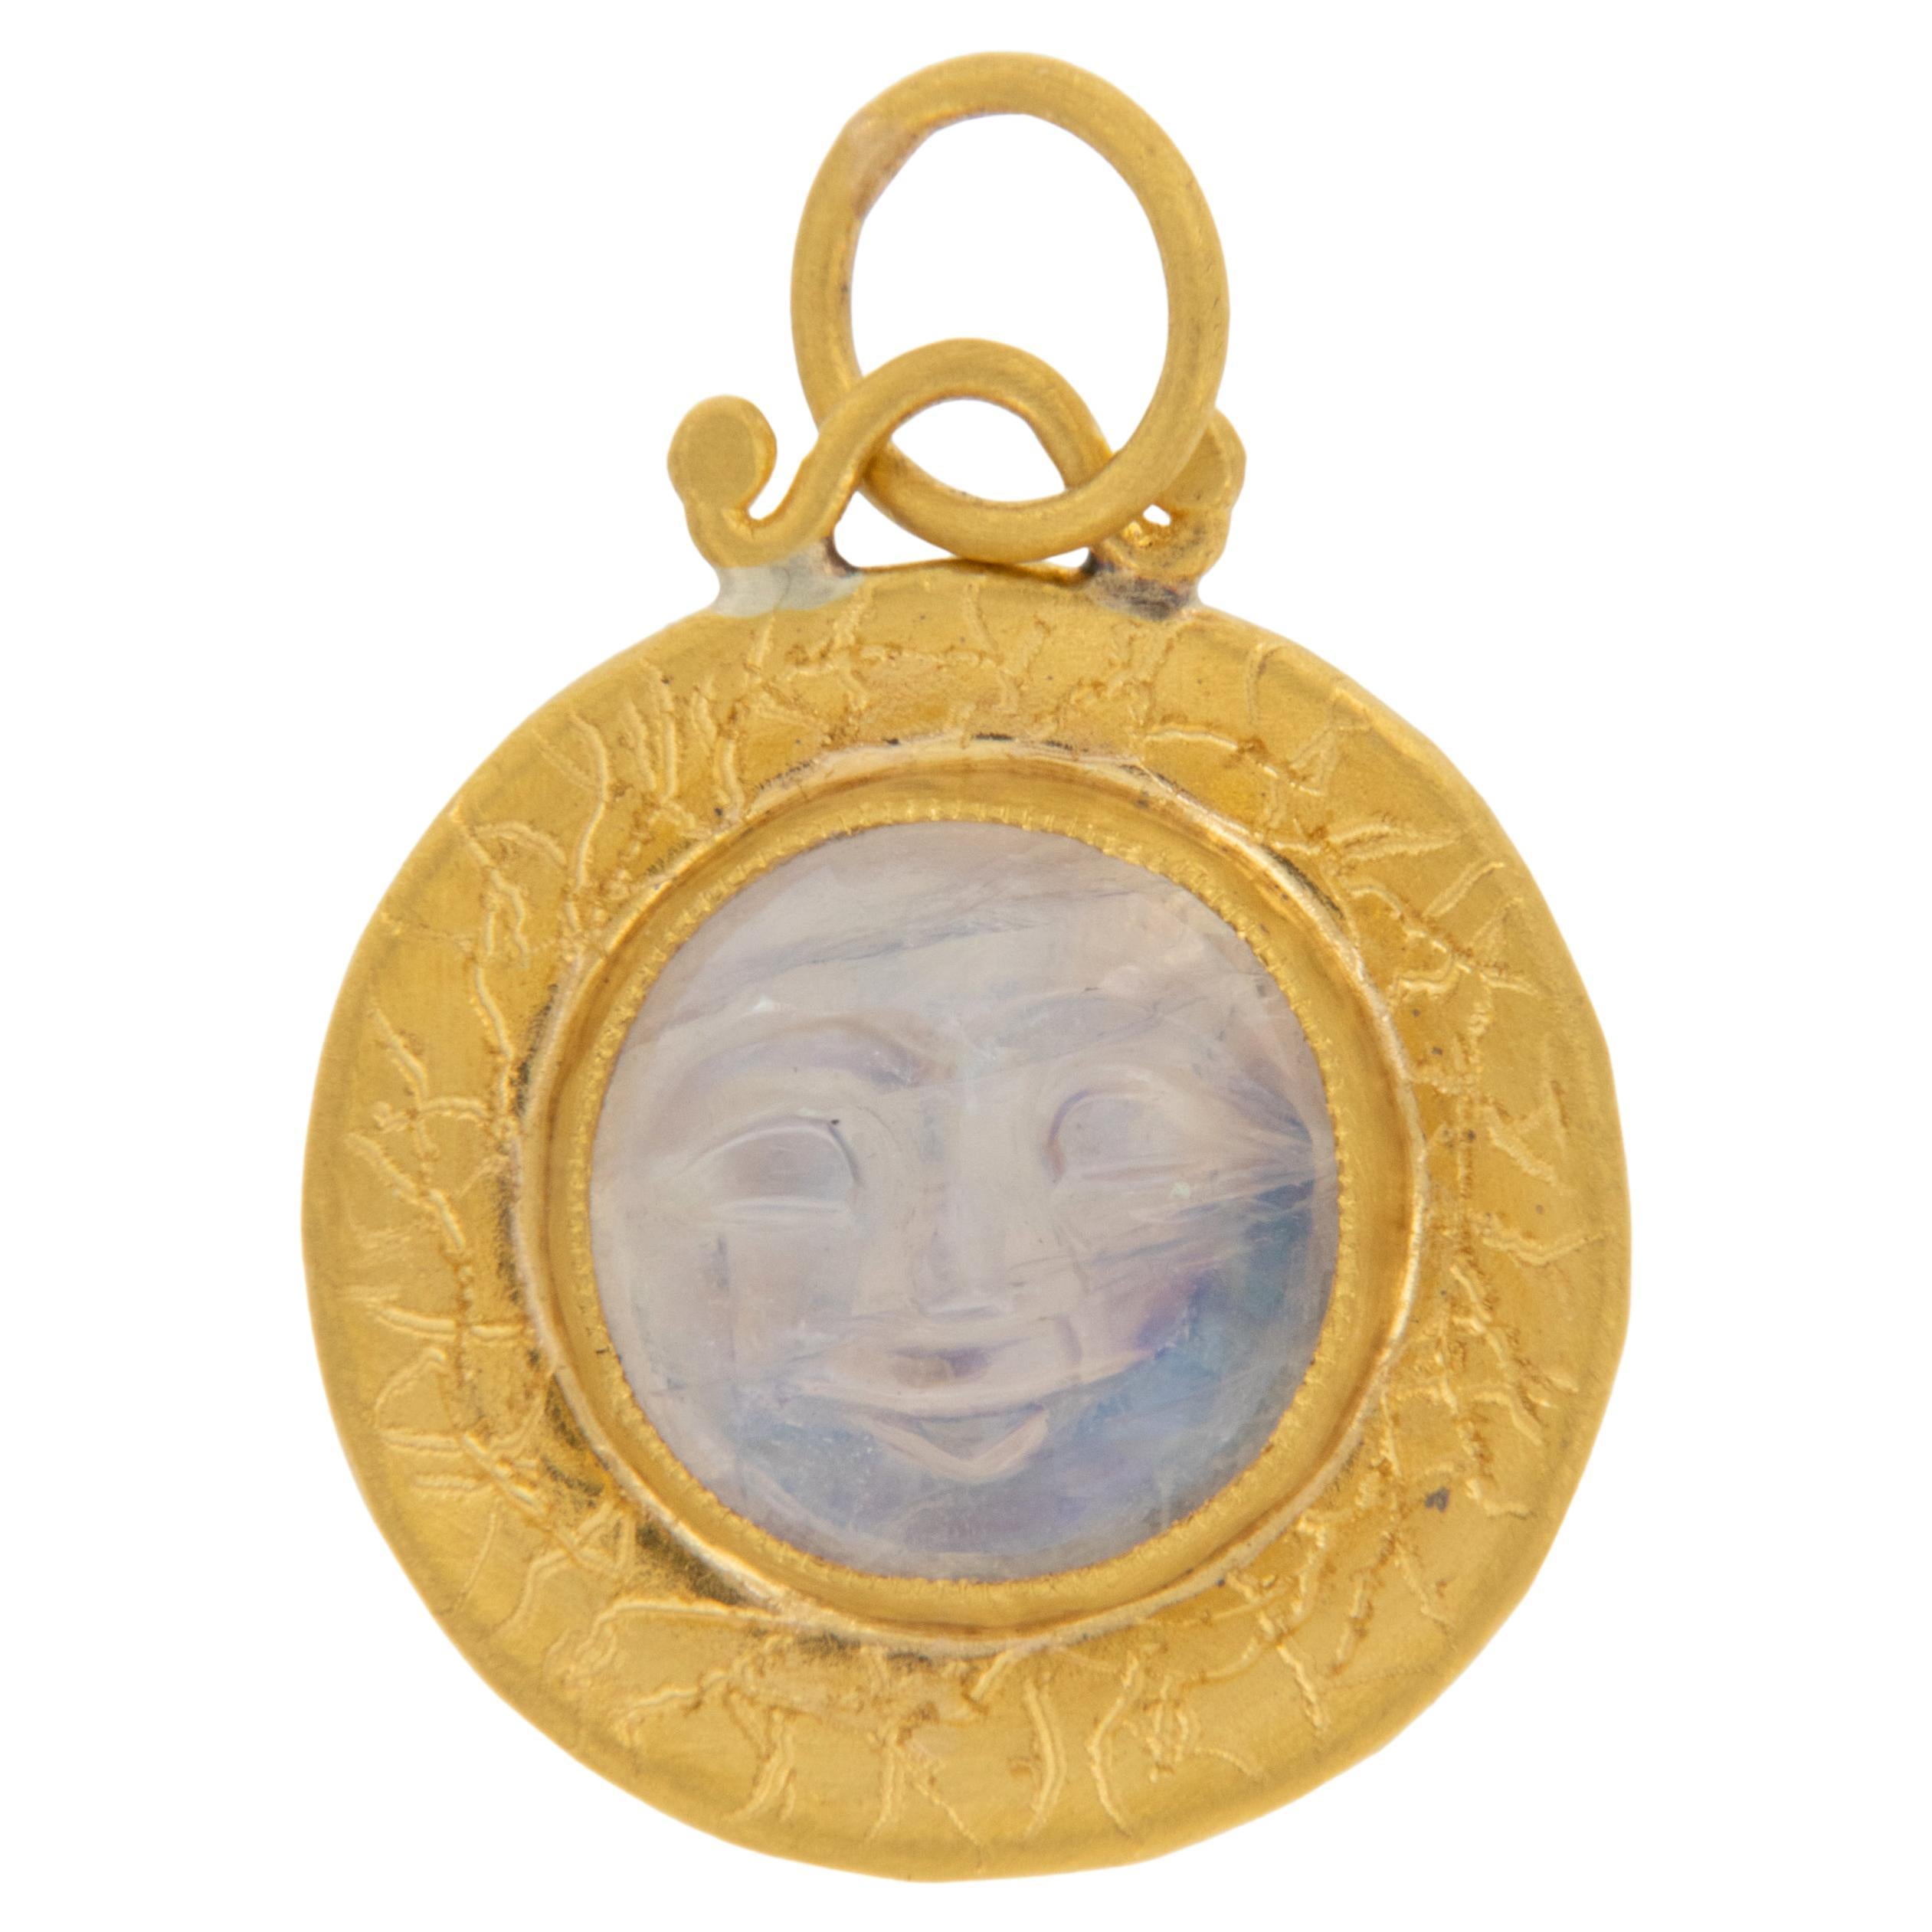 Pure 24 Karat Yellow Gold, Silver and Carved Moonstone Face Pendant Charm